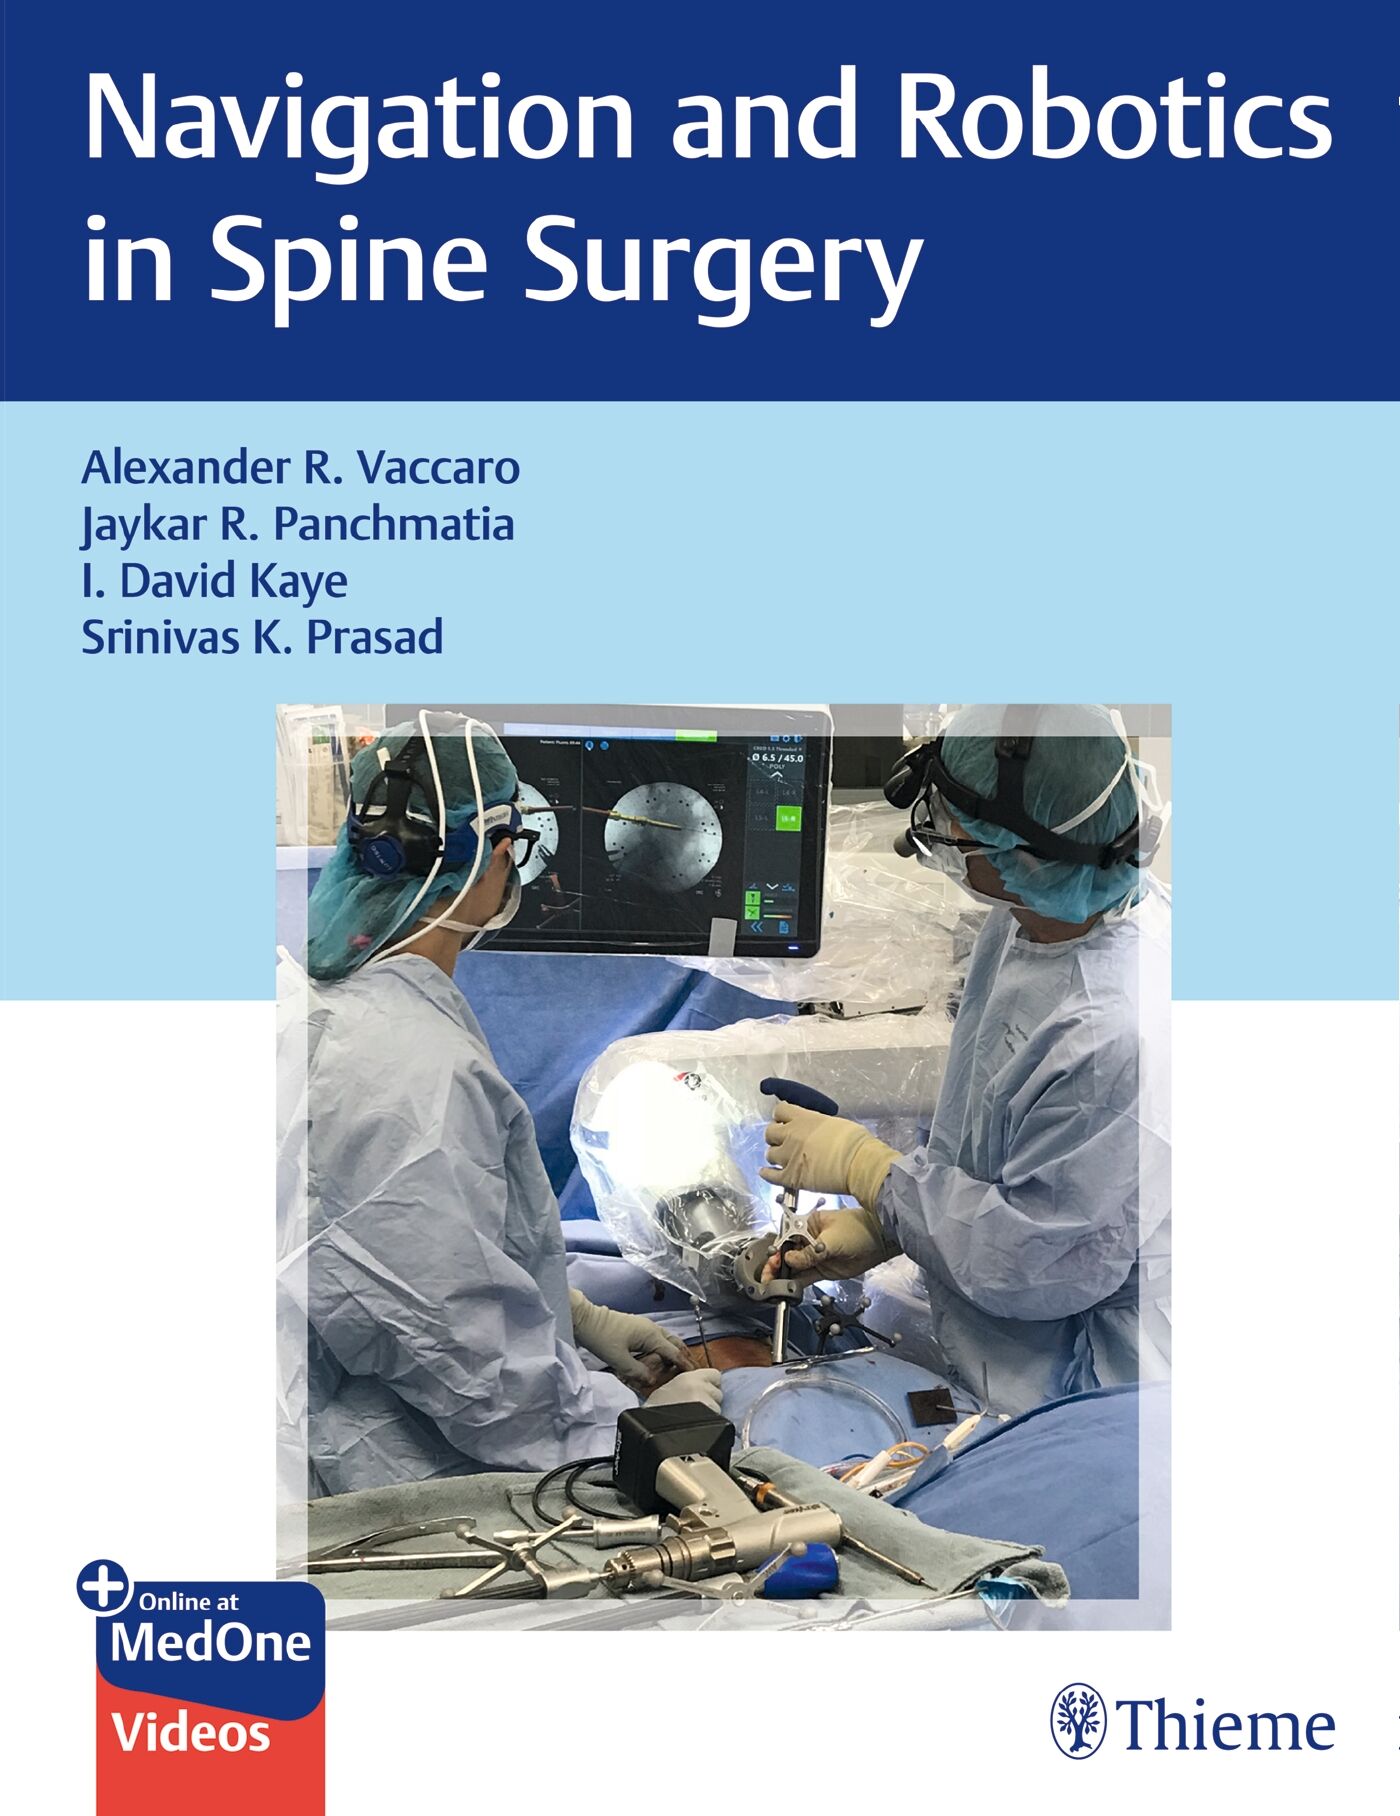 Navigation and Robotics in Spine Surgery, 9781684200313